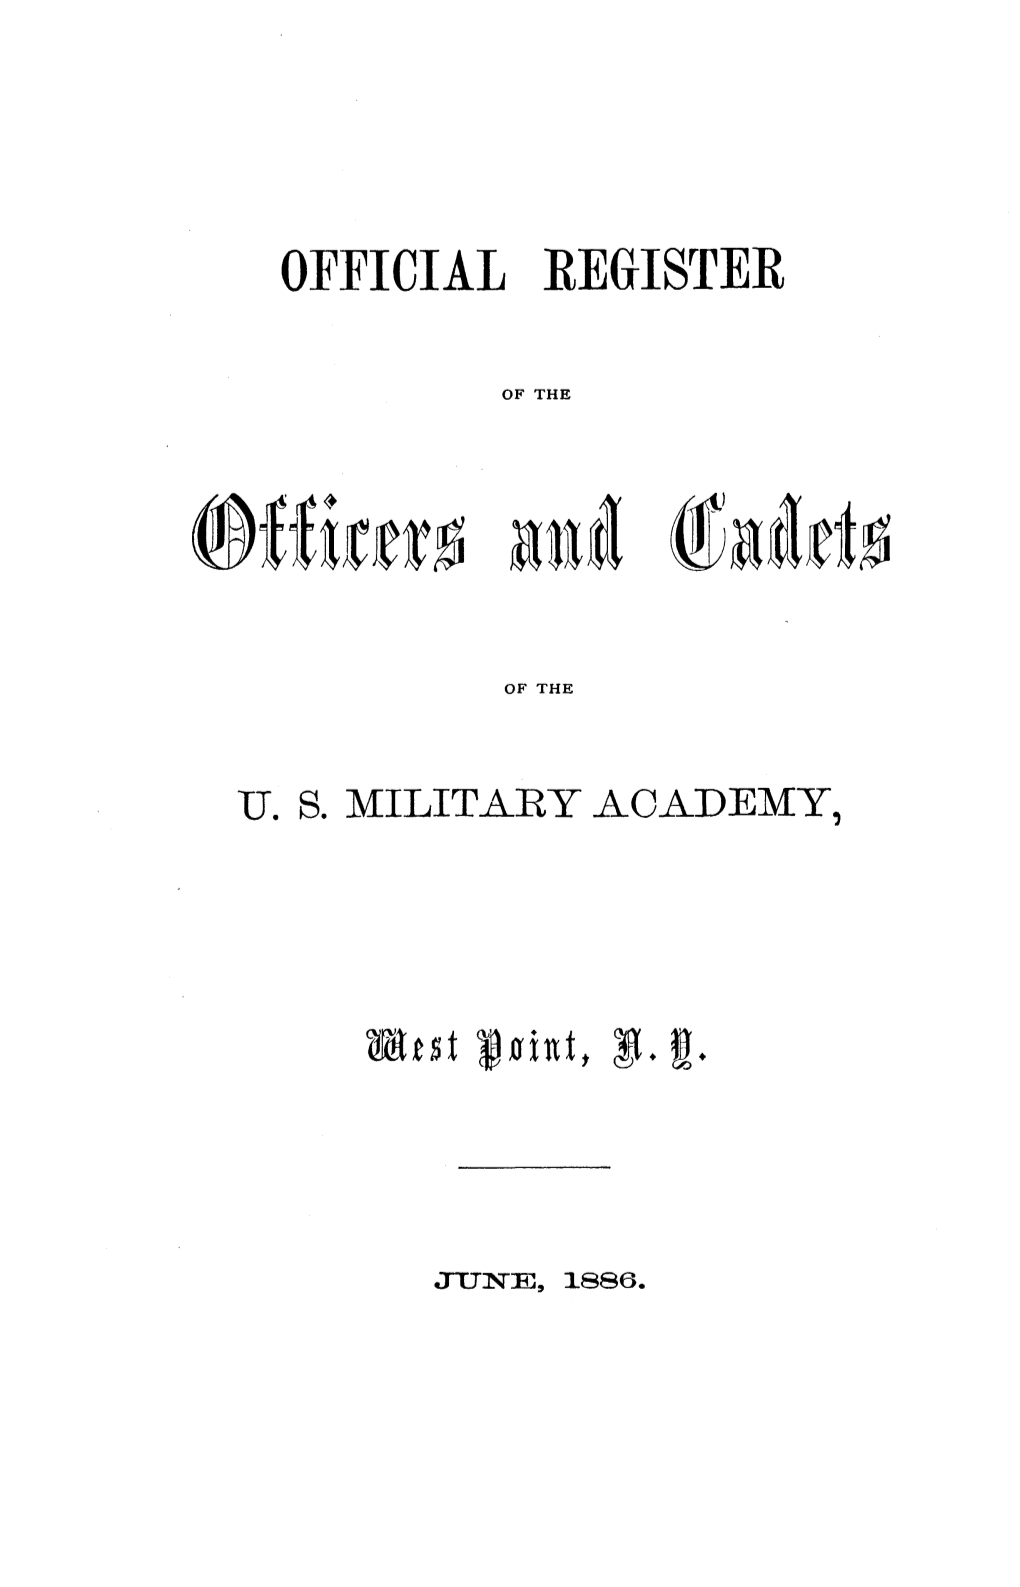 Official Register of the Officers and Cadets of the U.S. Military Academy, West Point, N.Y. 1886